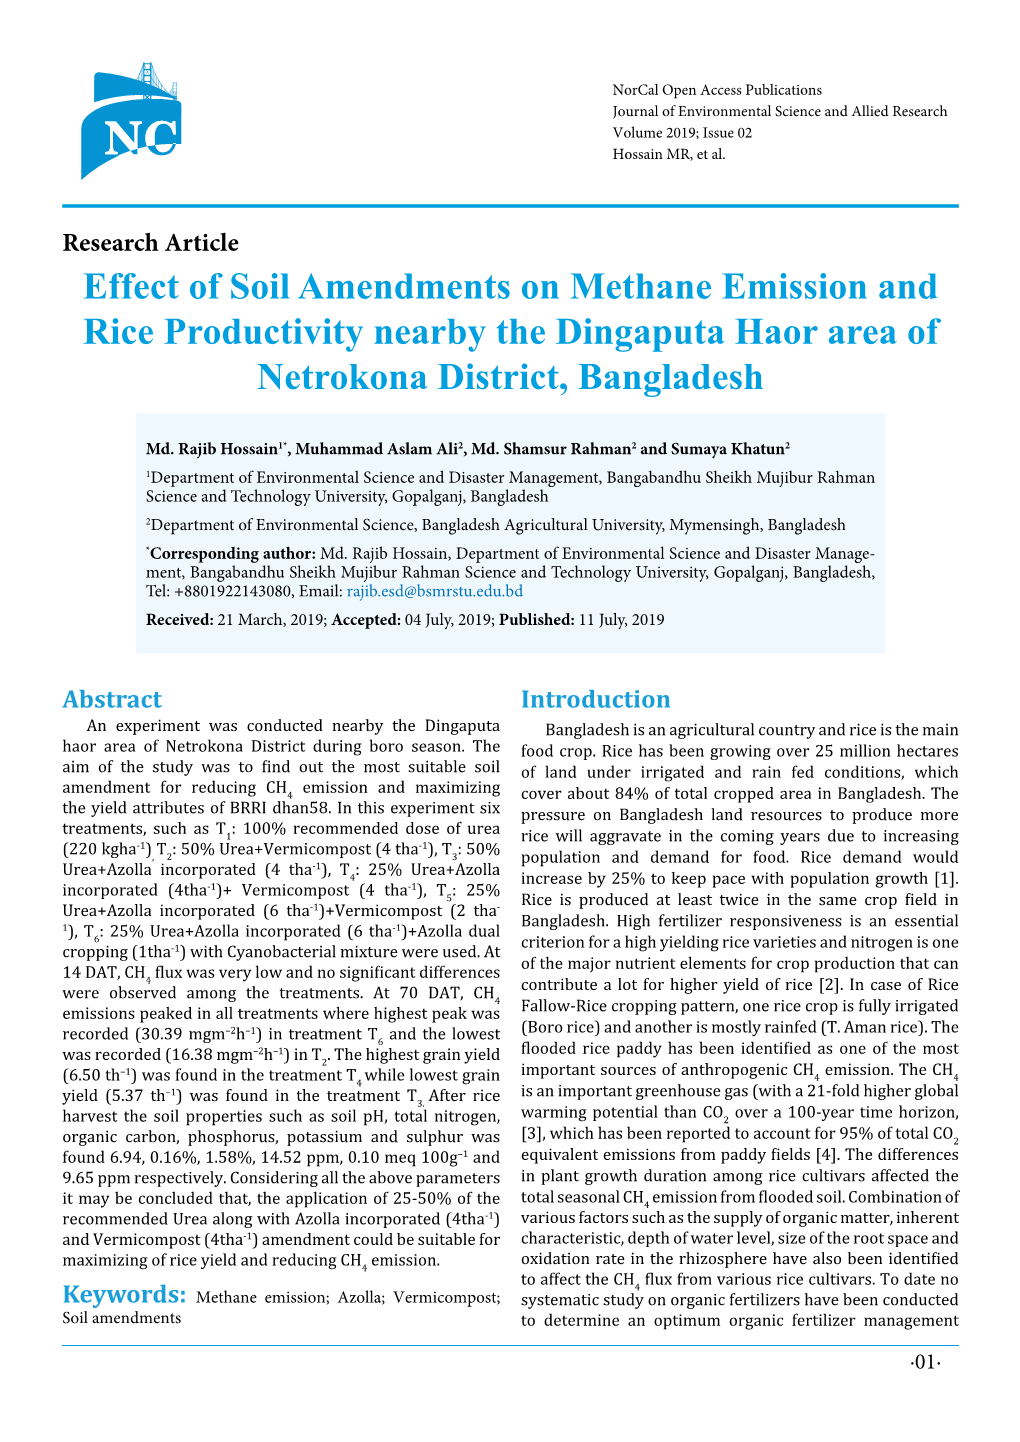 Effect of Soil Amendments on Methane Emission and Rice Productivity Nearby the Dingaputa Haor Area of Netrokona District, Bangladesh